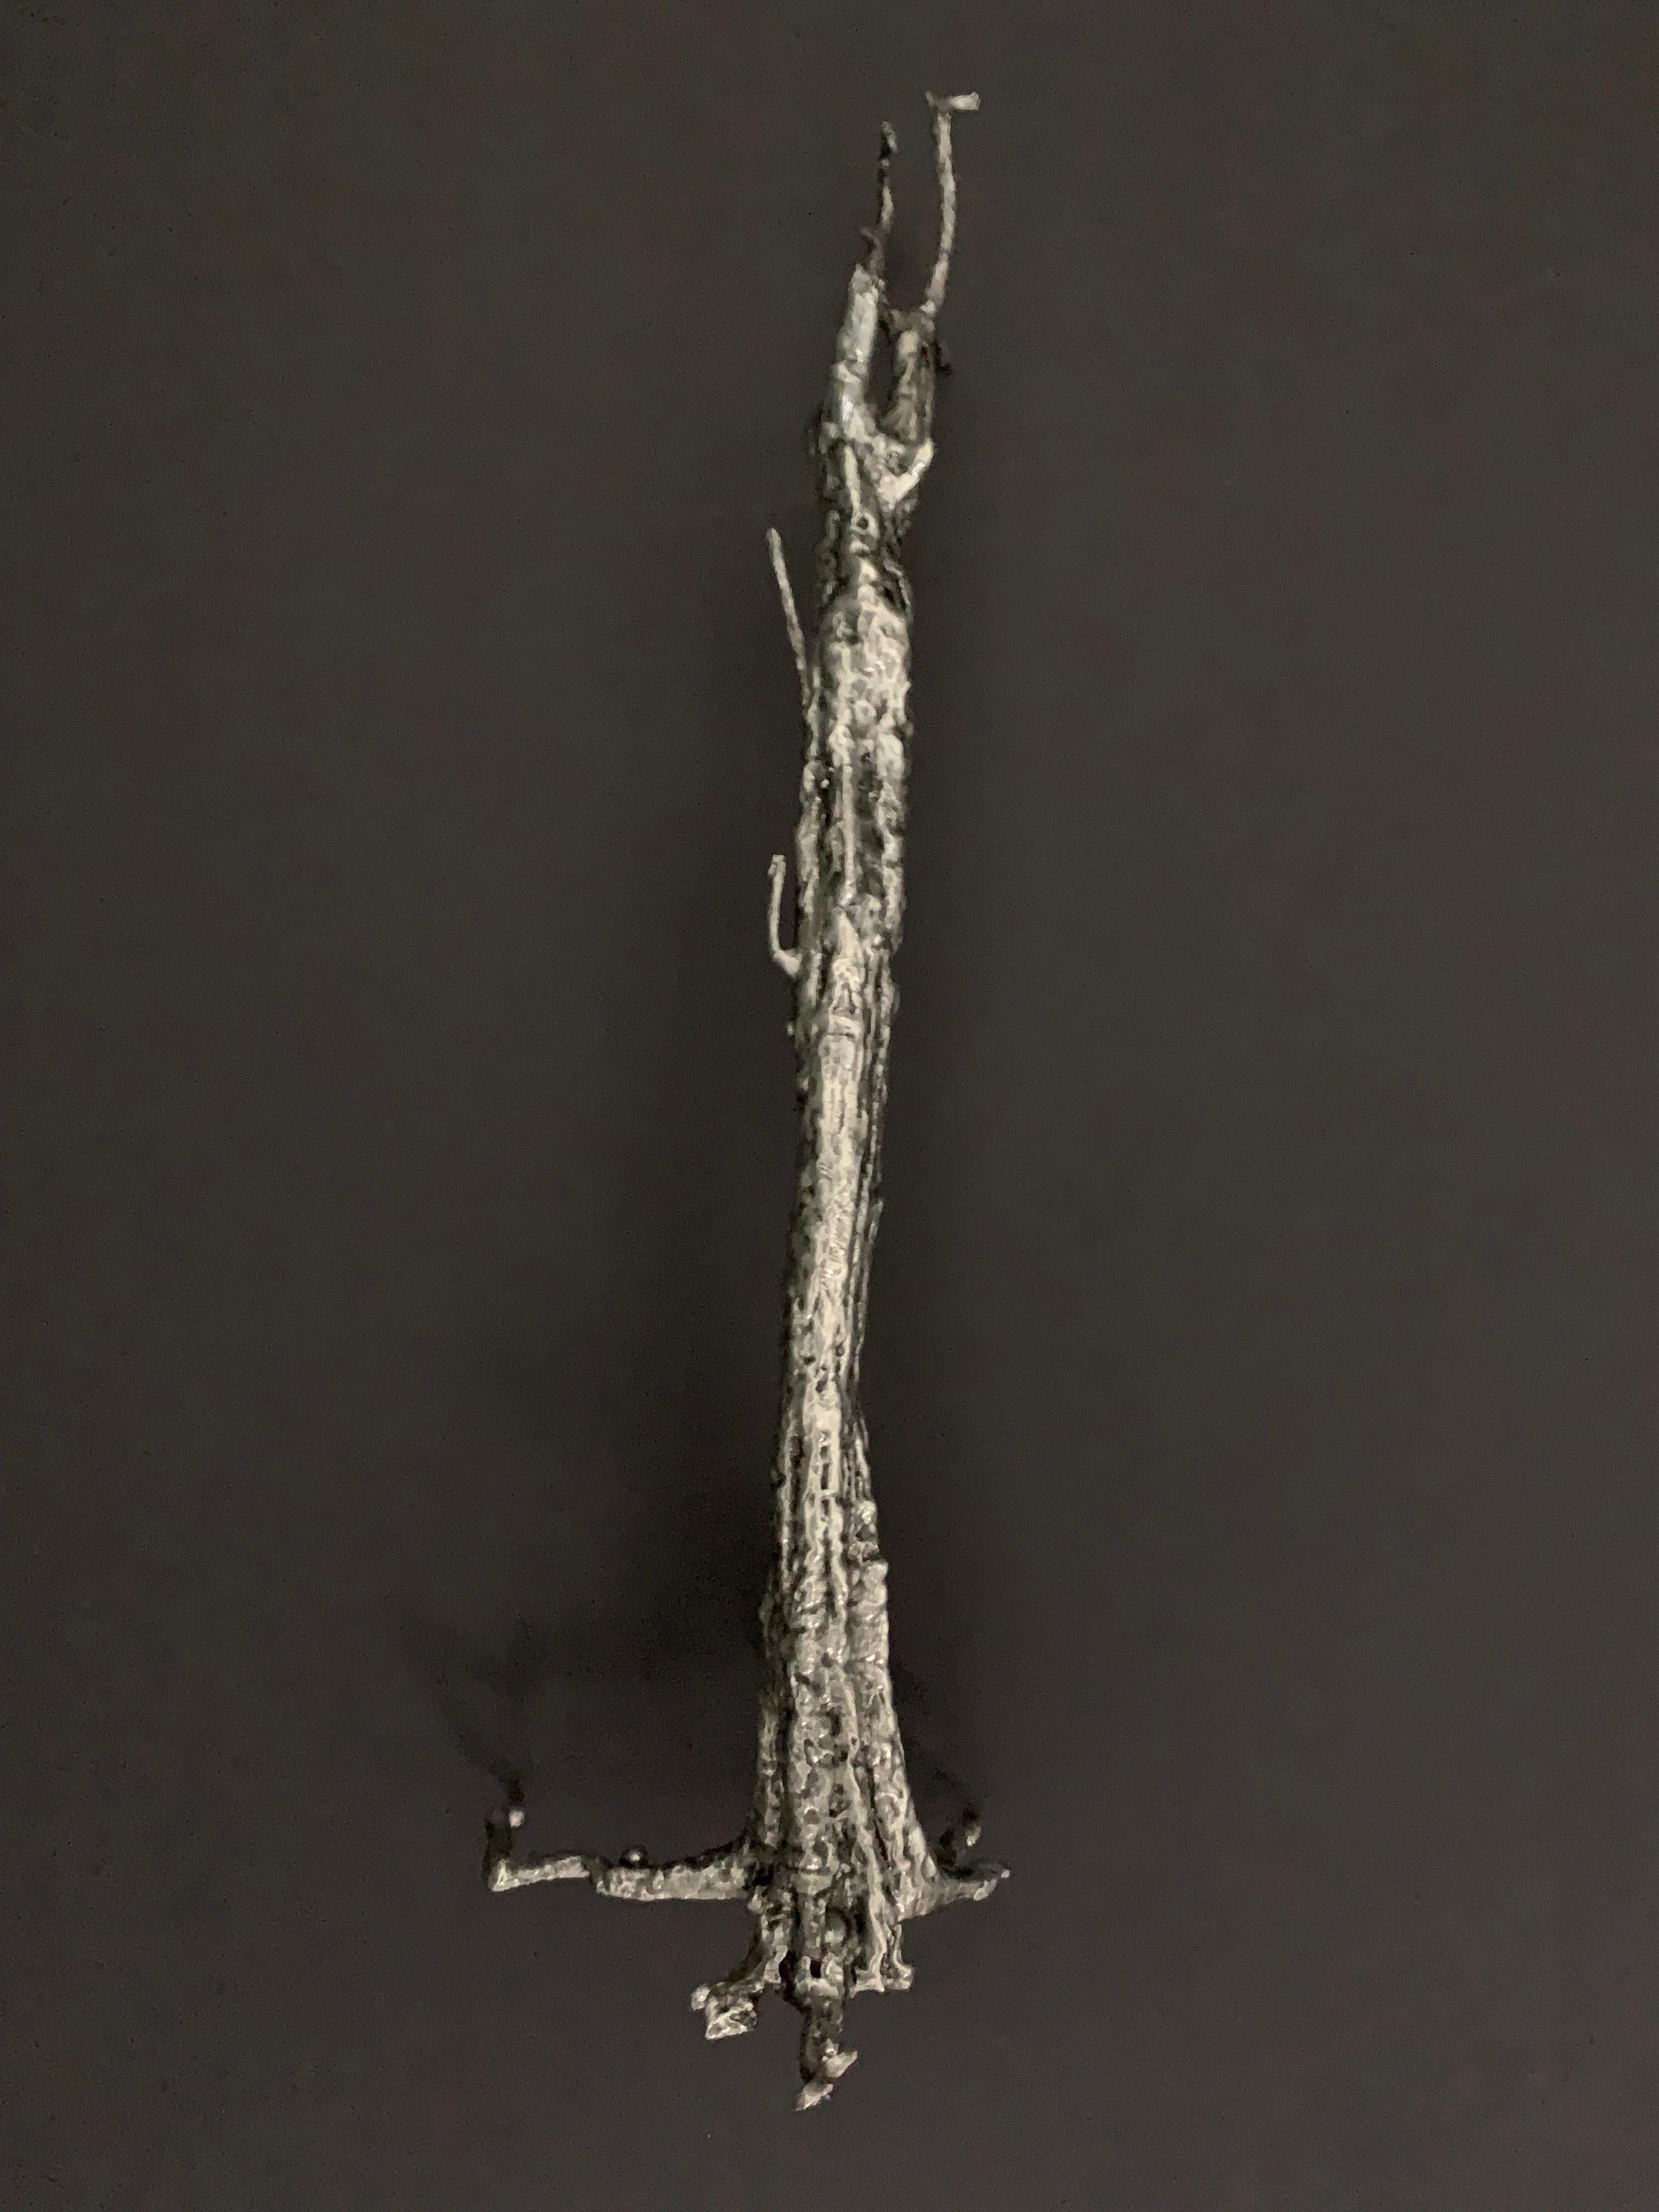 Pequi Tree Miniature is a sculpture, created from the most recent work by Ai Weiwei, Pequi Tree, 2018-2020, and produced at a 1/100 scale.

The sculpture is an artist’s edition, exclusive to Serralves, Portugal, limited to 250 copies, numbered and